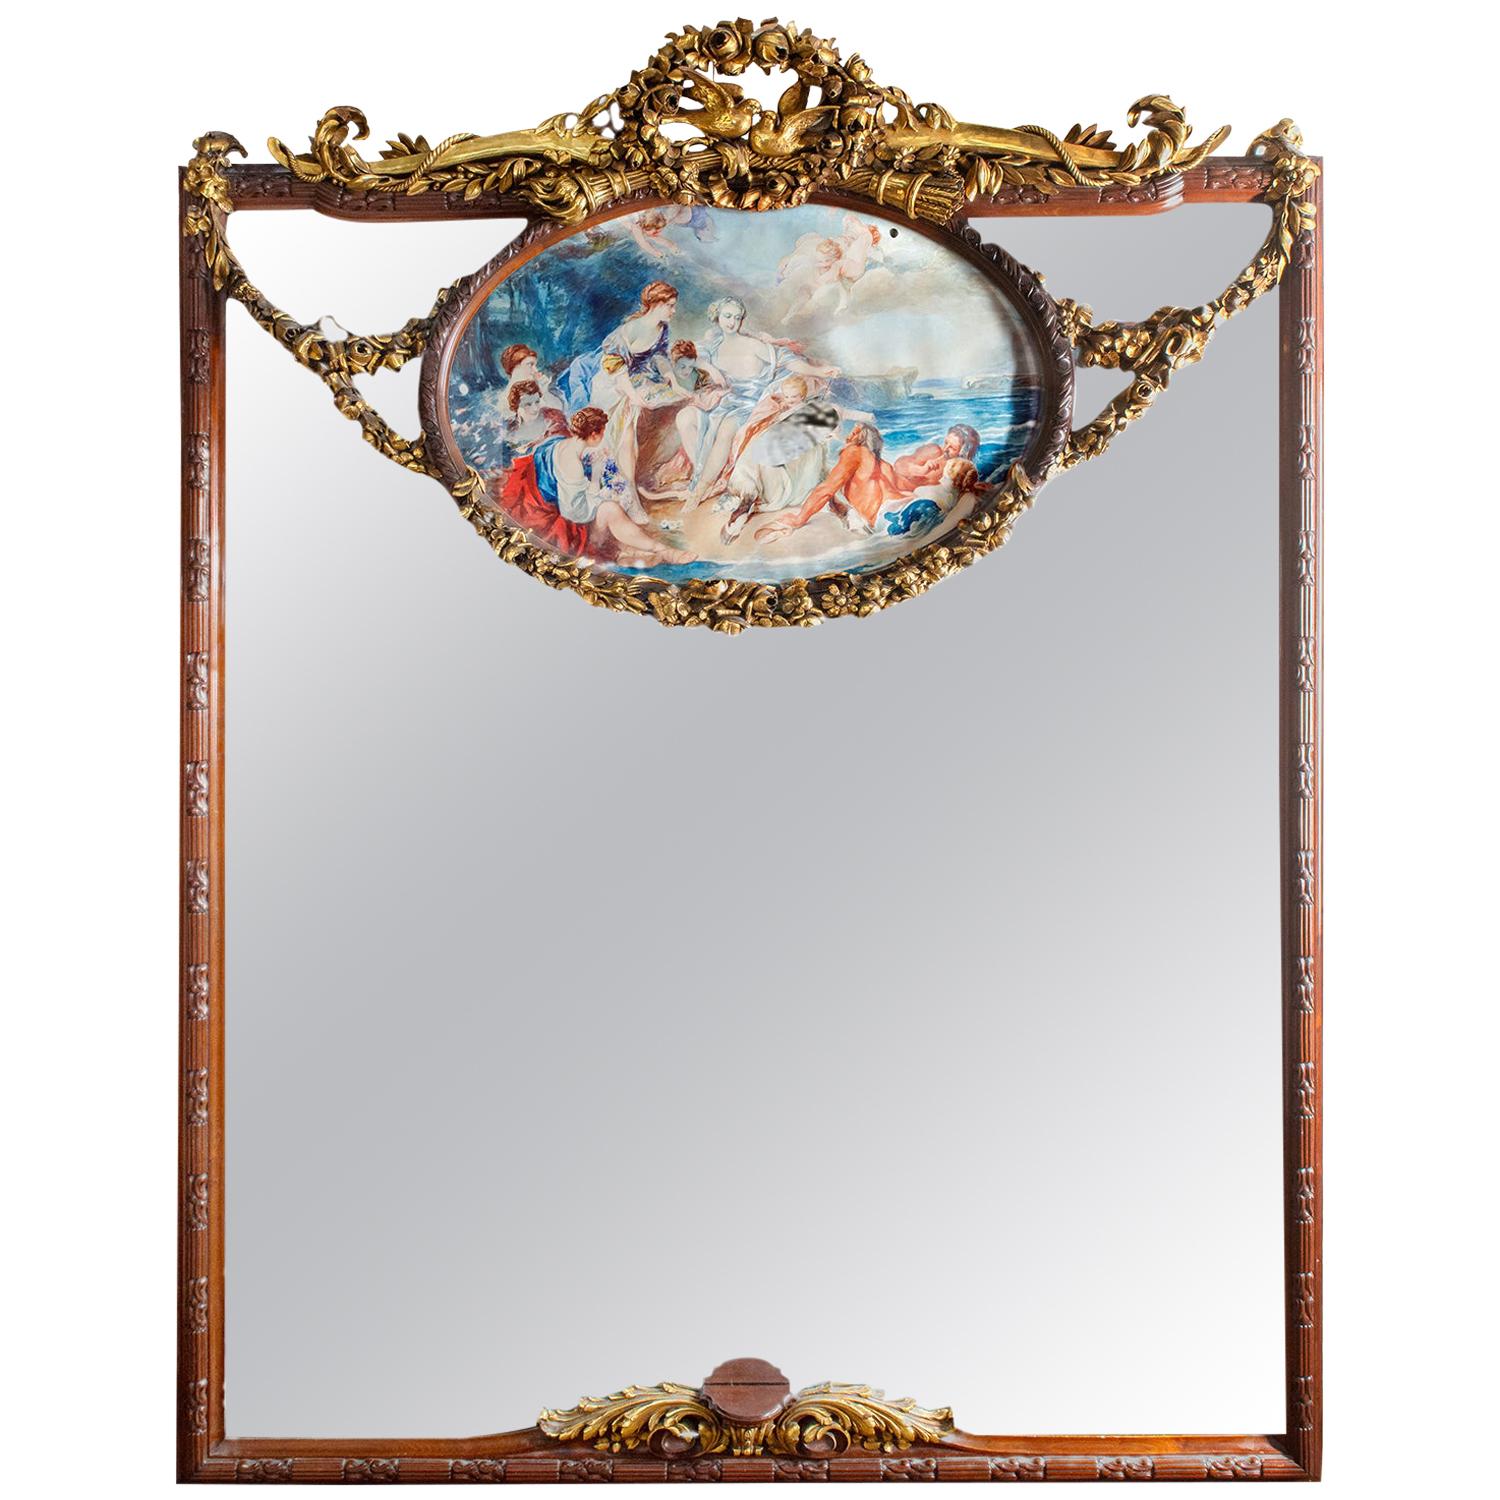 Monumental Classical Wall Mirror, 260cm(102") high For Sale